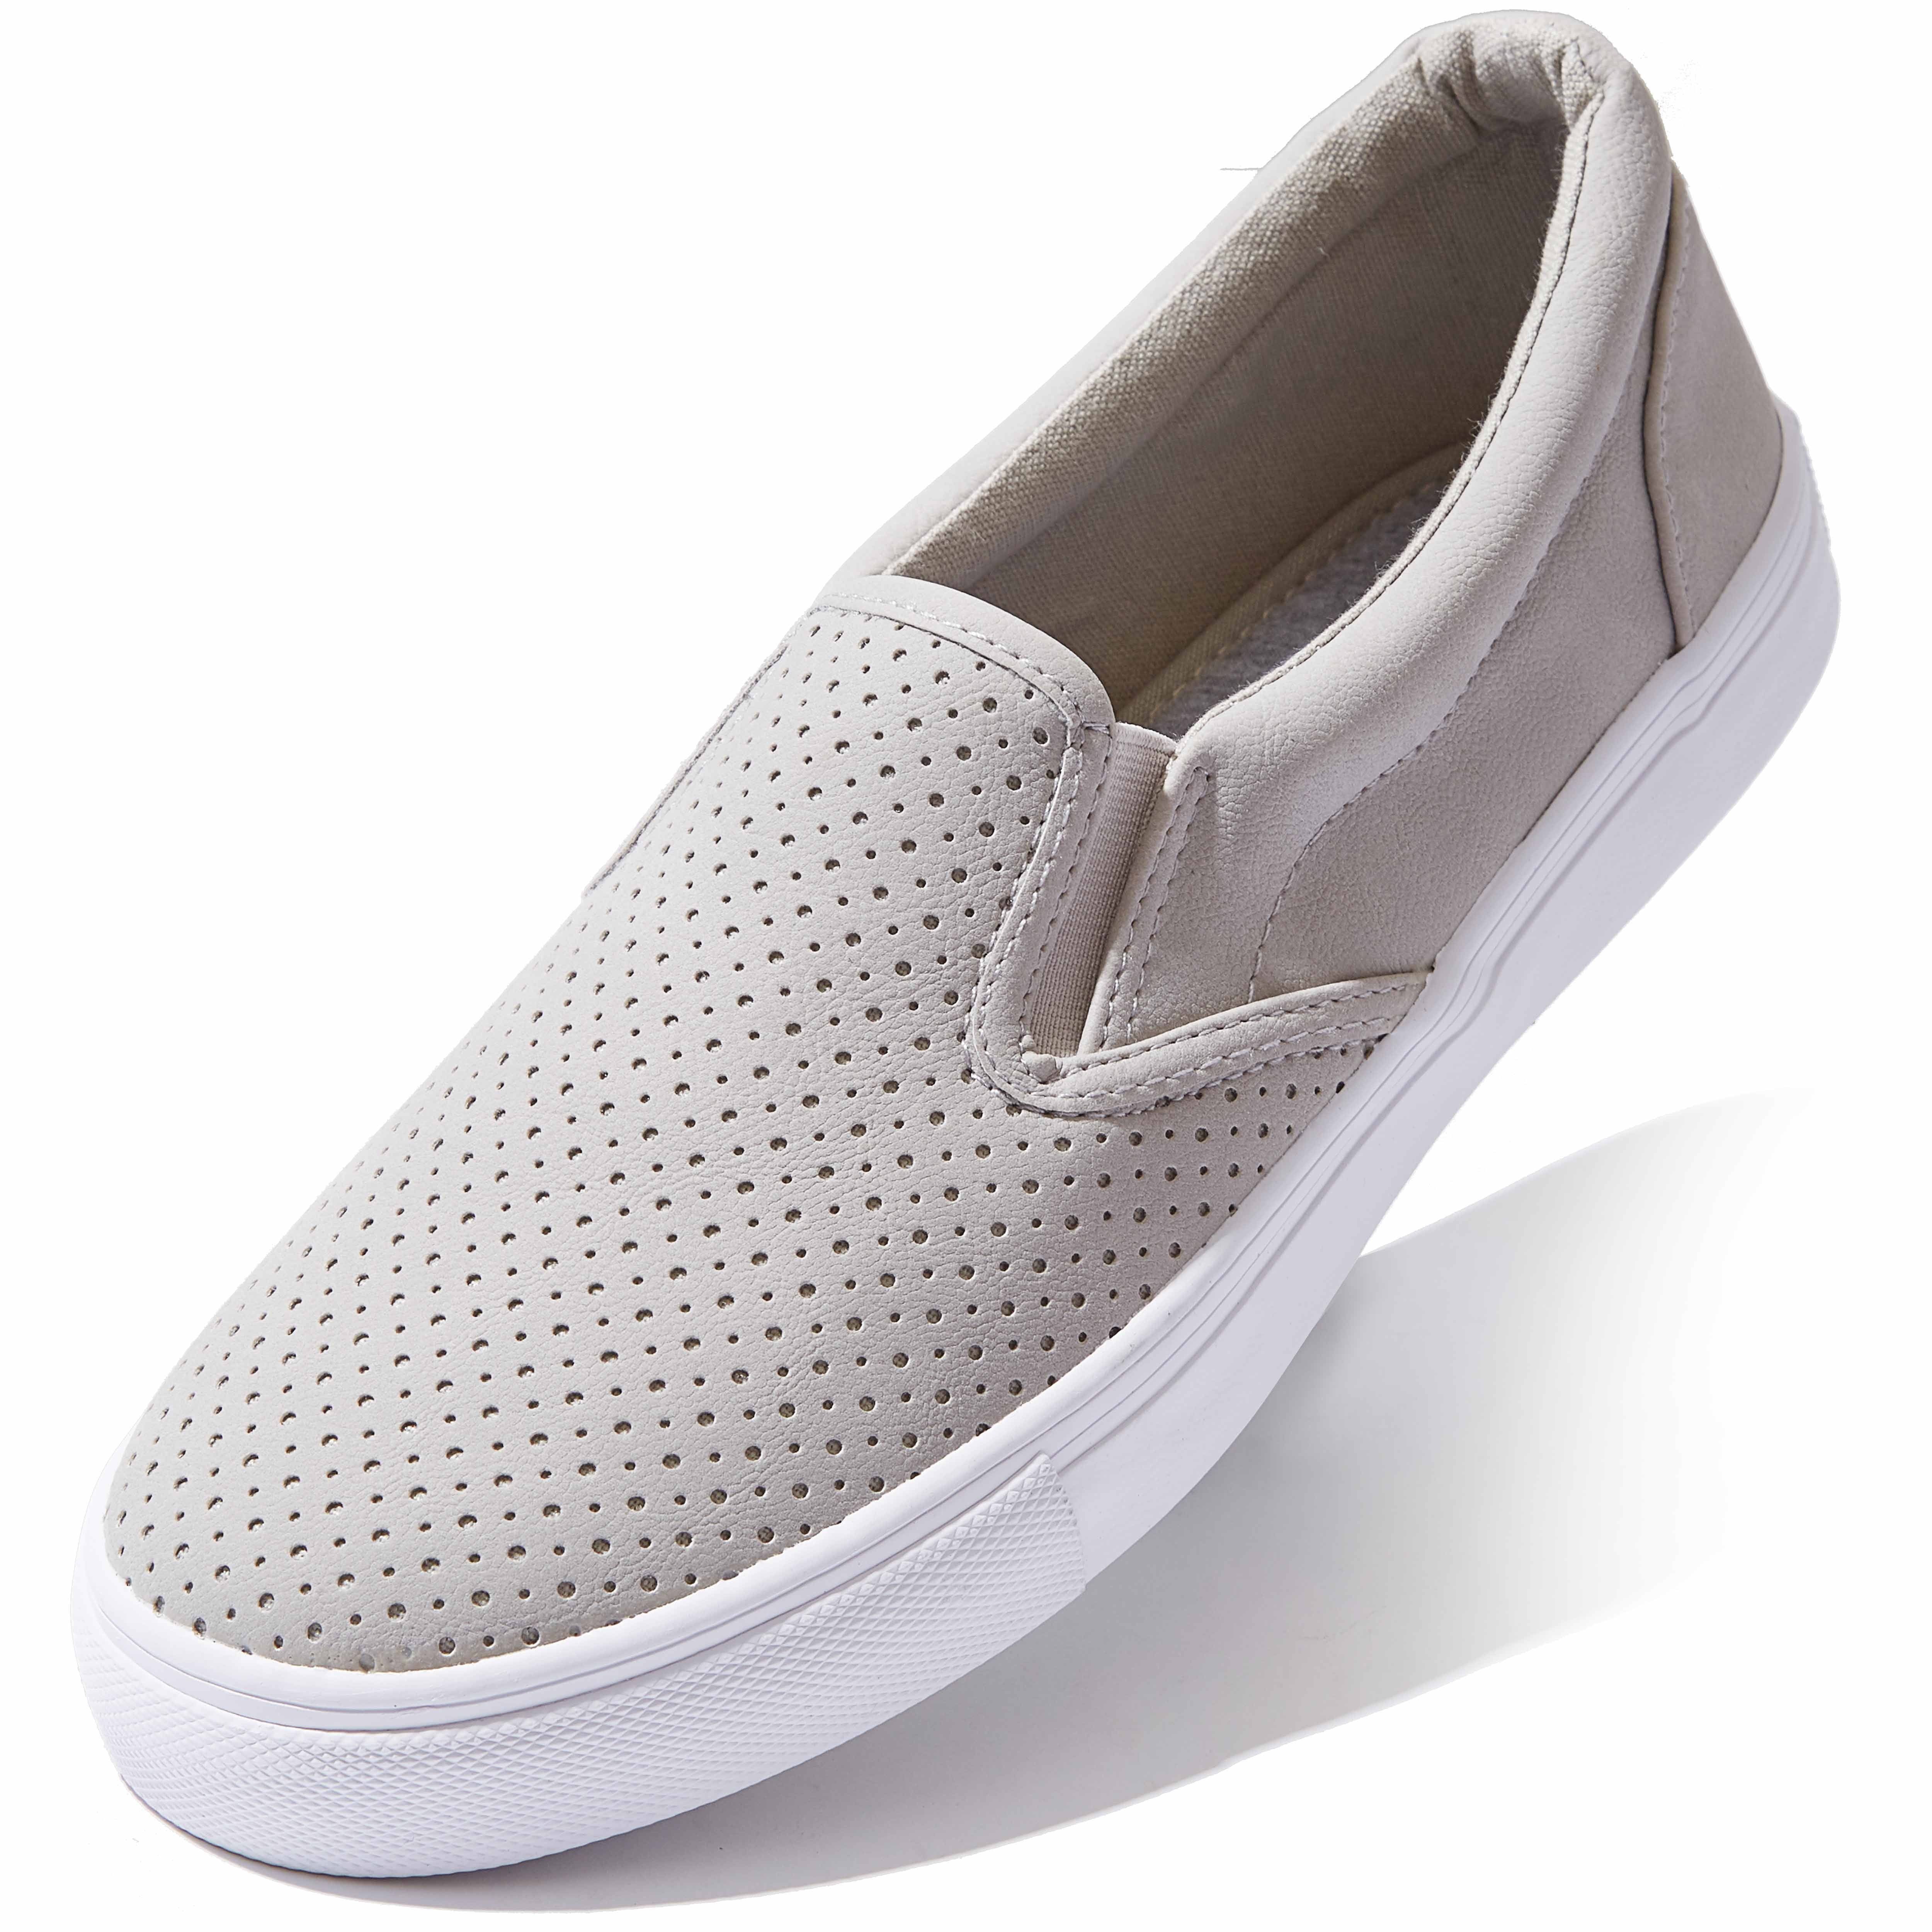 Pinhole Cushioned Sneakers Low Top Slip 